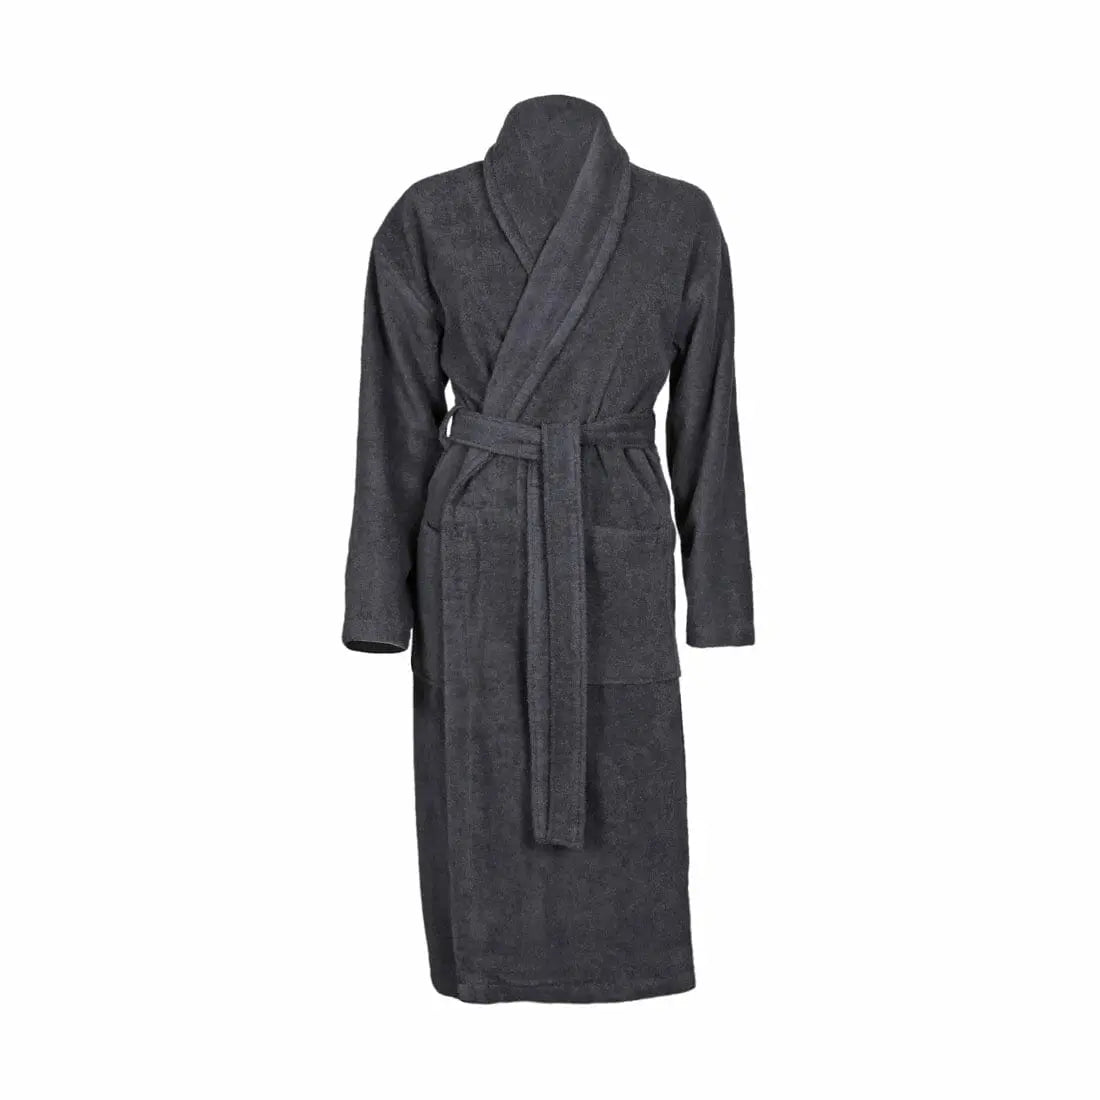 Personalised Back of Robe Cotton Shawl Collar Bathrobe 400gsm Boutique - Slate Small 